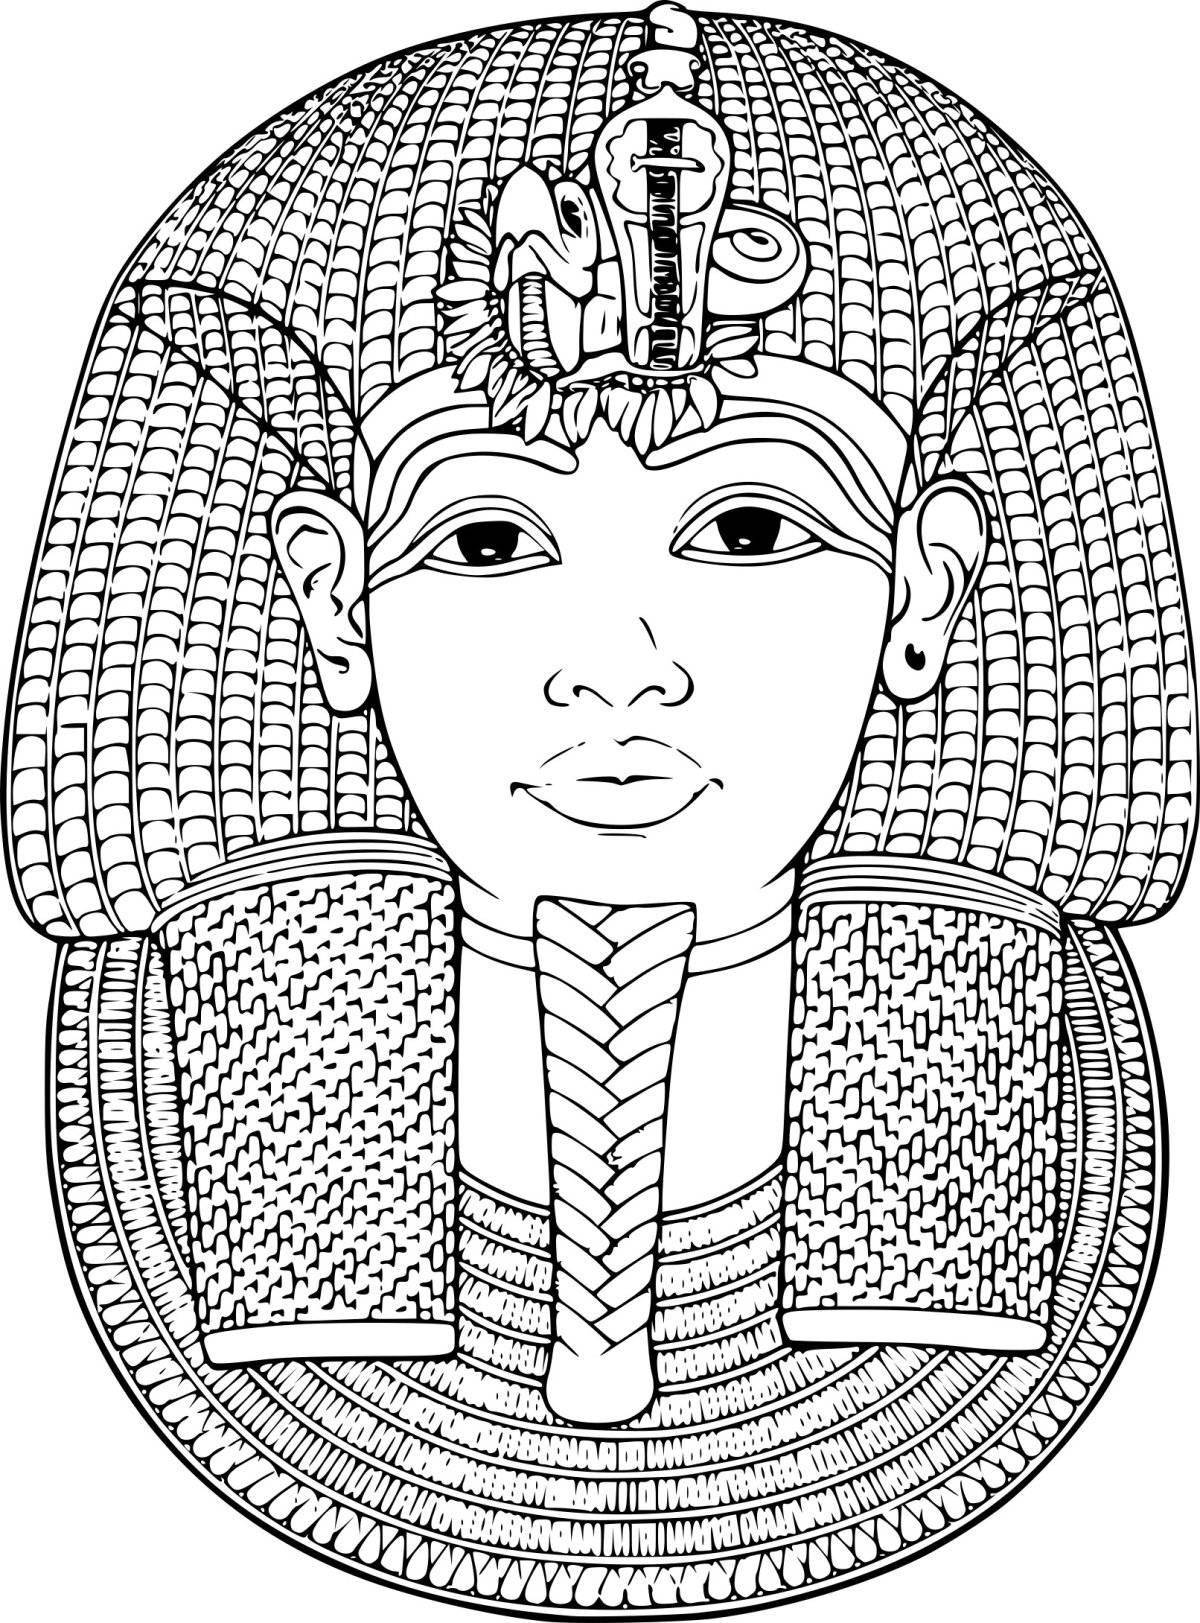 Coloring page mask of the dazzling pharaoh